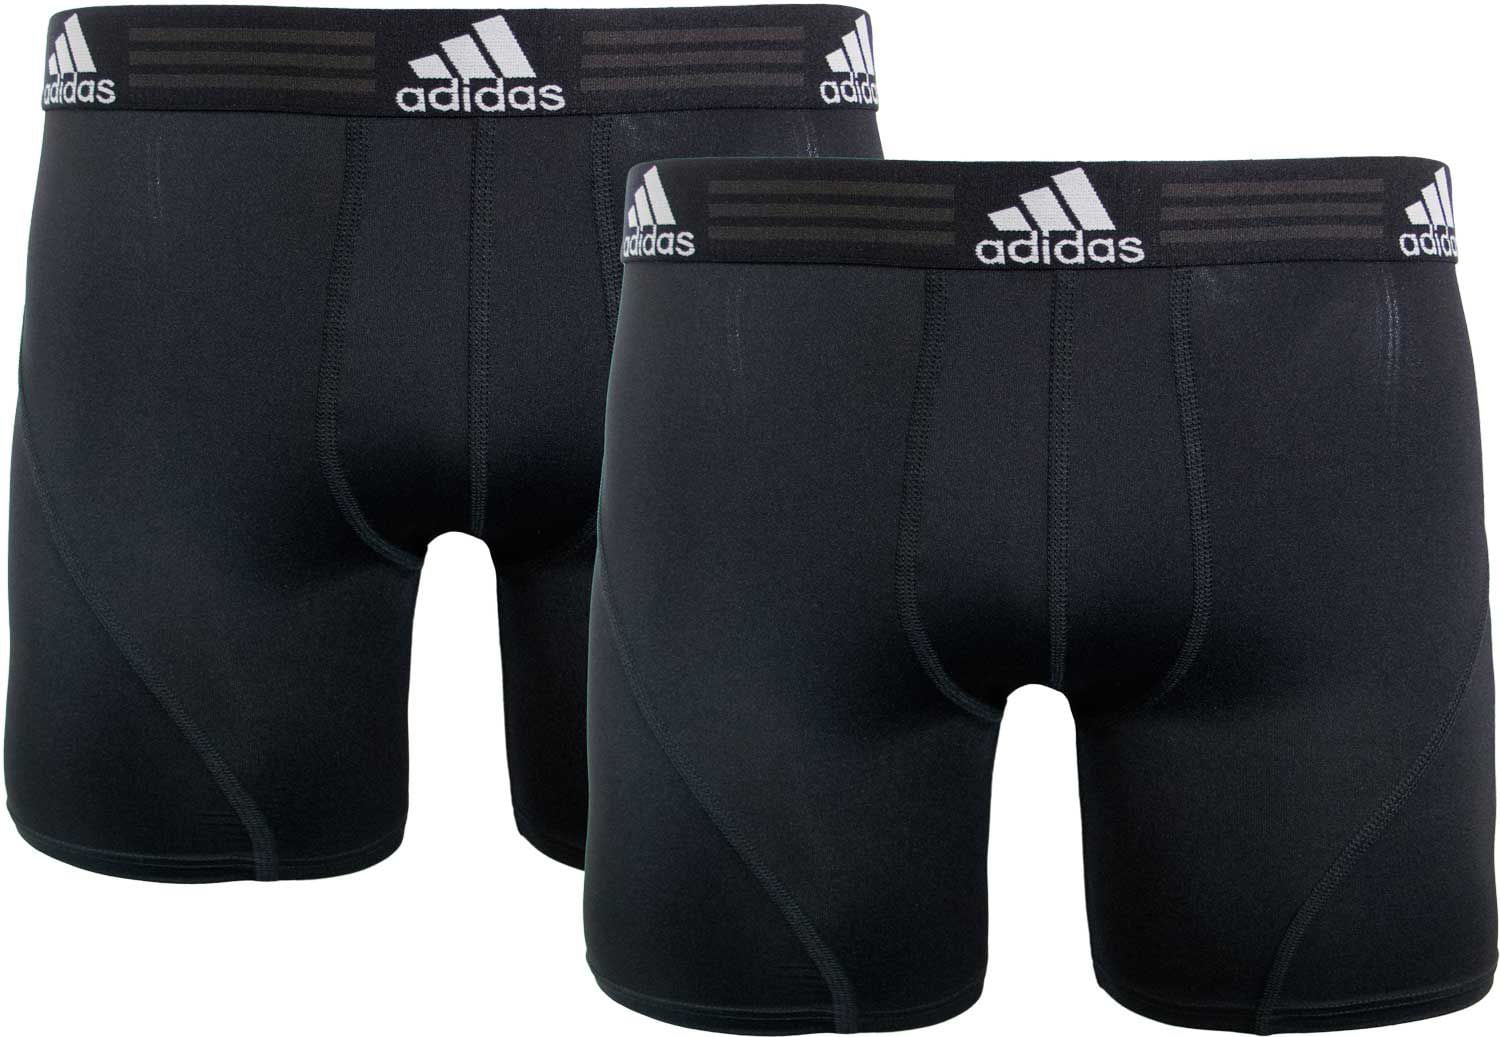 adidas sport performance climalite 2-pack brief -